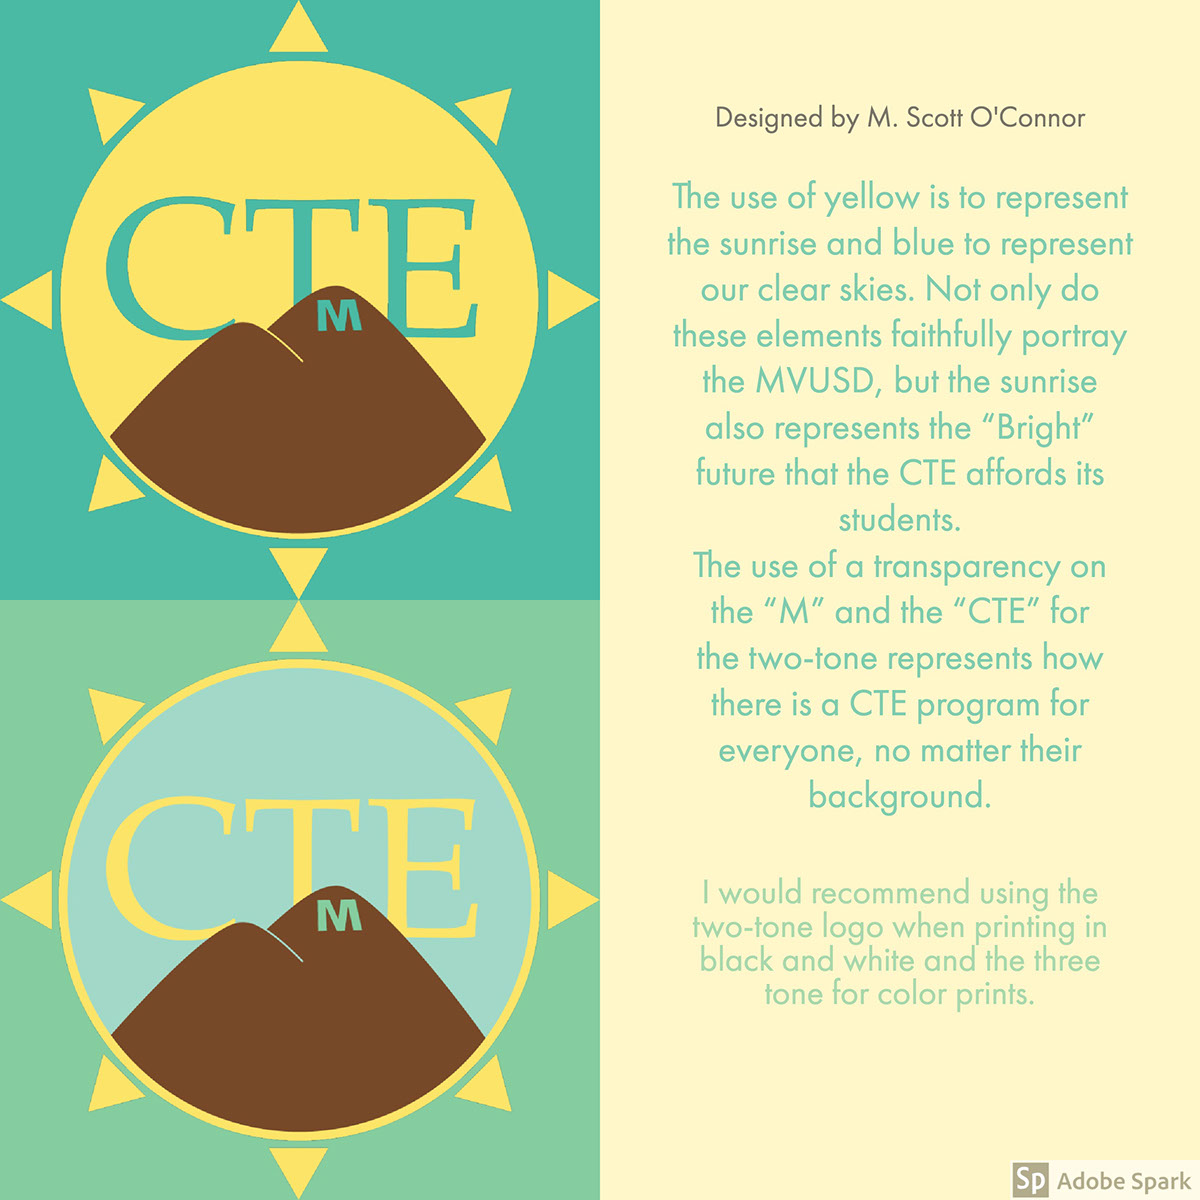 The use of yellow is to represent the sunrise and blue to represent our clear skies. Not only do these elements faithfully portray the MVUSD, but the sunrise also represents the “Bright” future that the CTE affords its students. The use of a transparency on the “M” and the “CTE” for the two-tone represents how there is a CTE program for everyone, no matter their background.